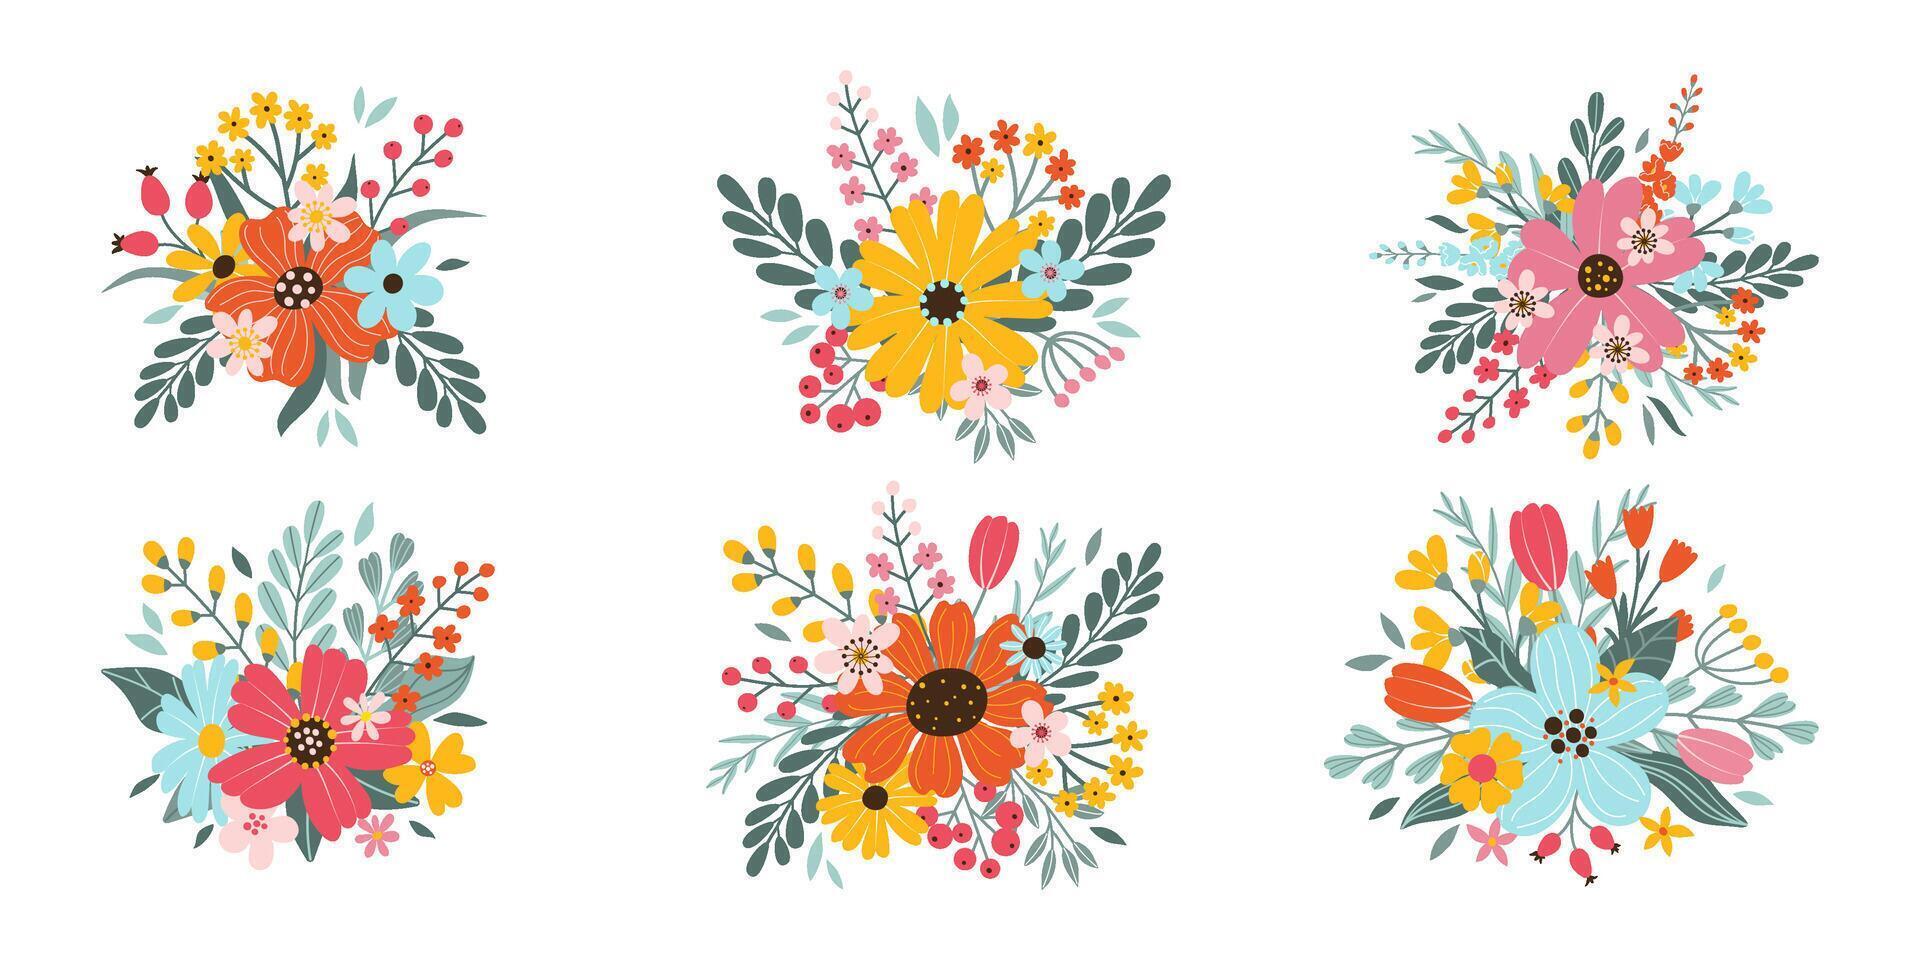 Set isolated beautiful spring or summer bouquets. Cute hand drawn flat vector flowers, leaves, berries. Design elements for decoration greeting card, poster, wedding invitation.